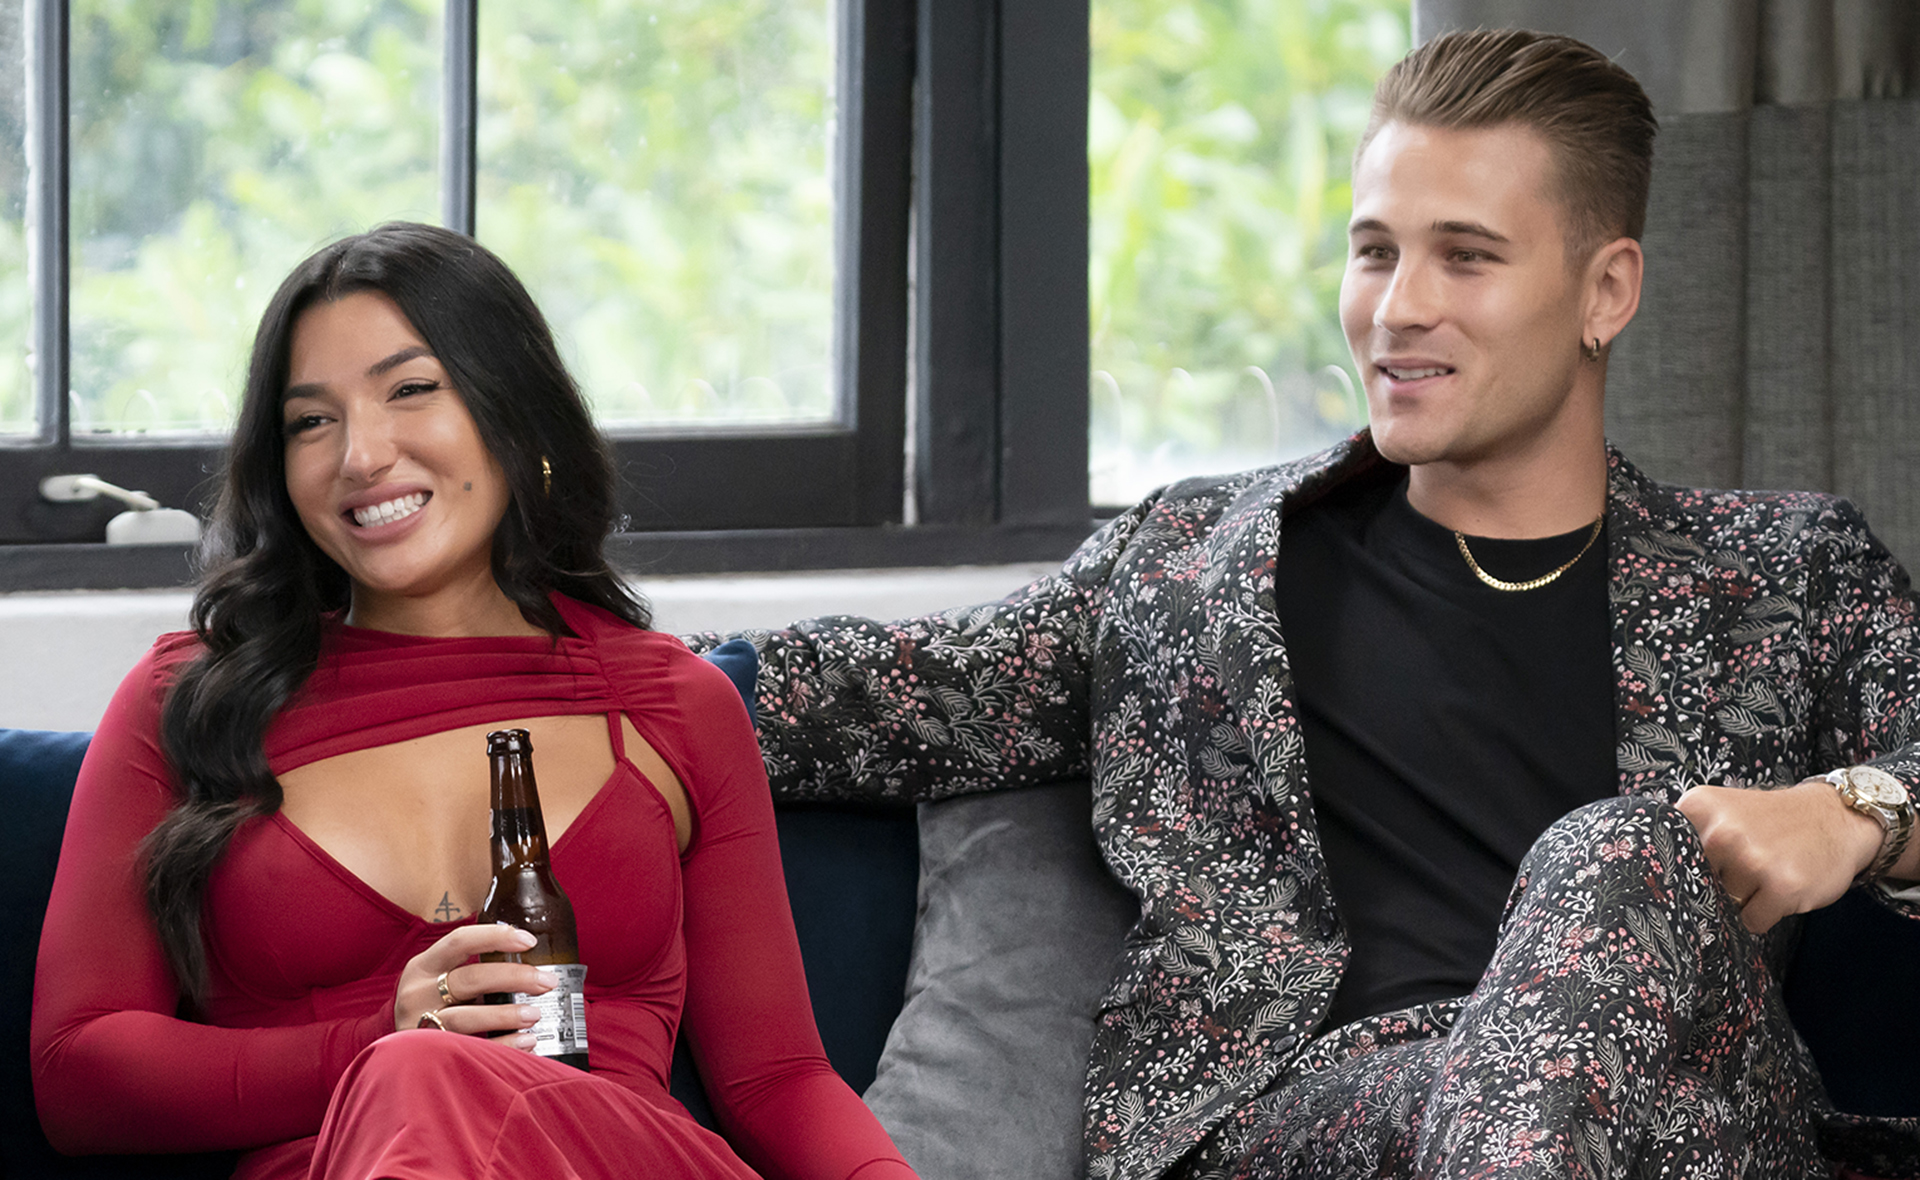 EXCLUSIVE: Why MAFS’ Ella Ding is giving Mitch Eynaud one “last chance” after brutal dumping in their final vows